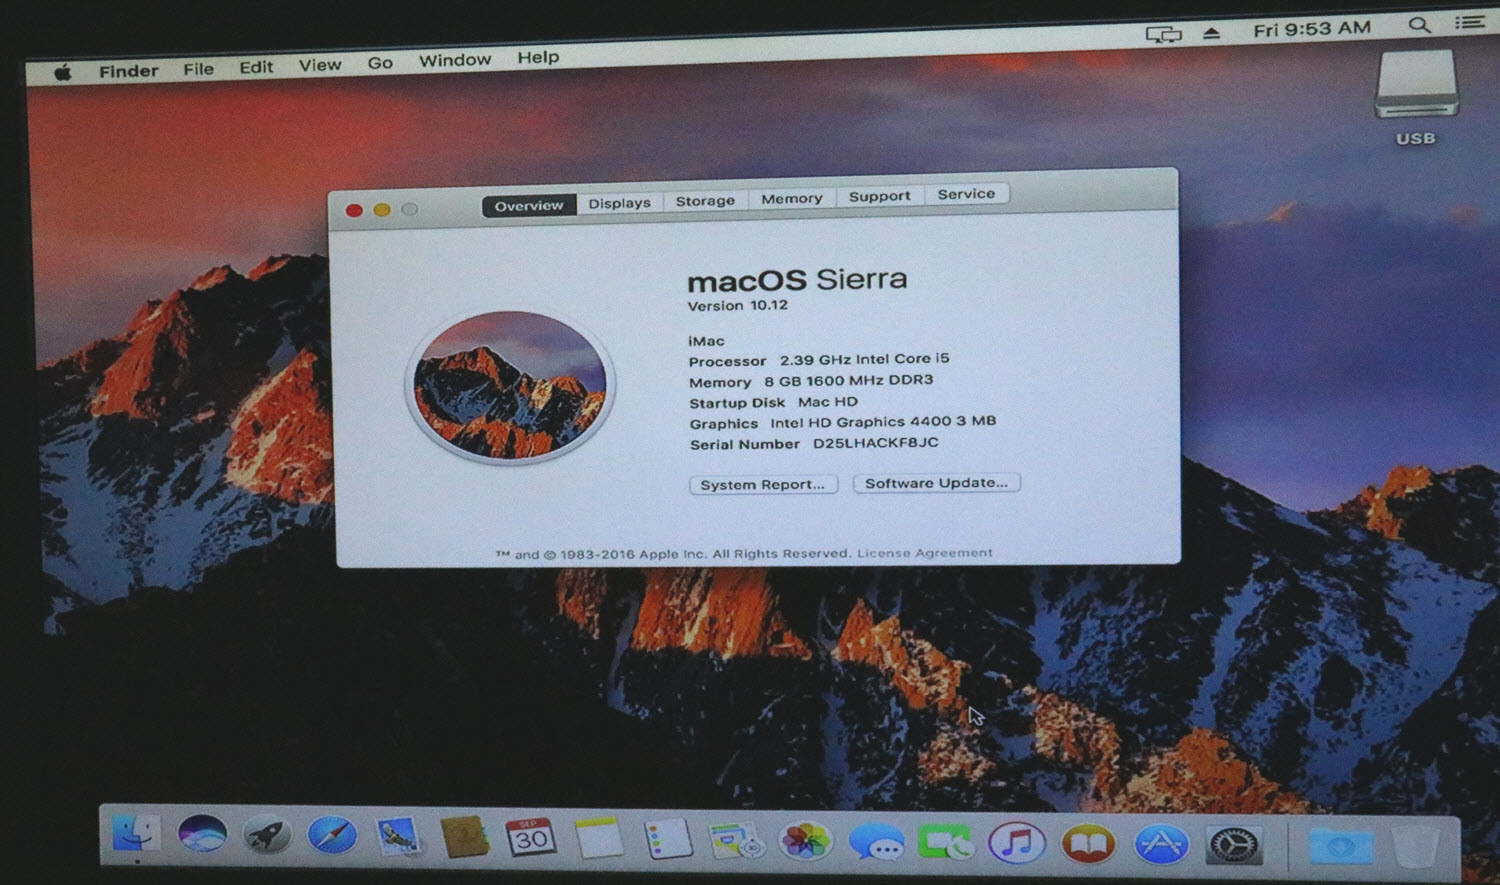 installing macos on pc